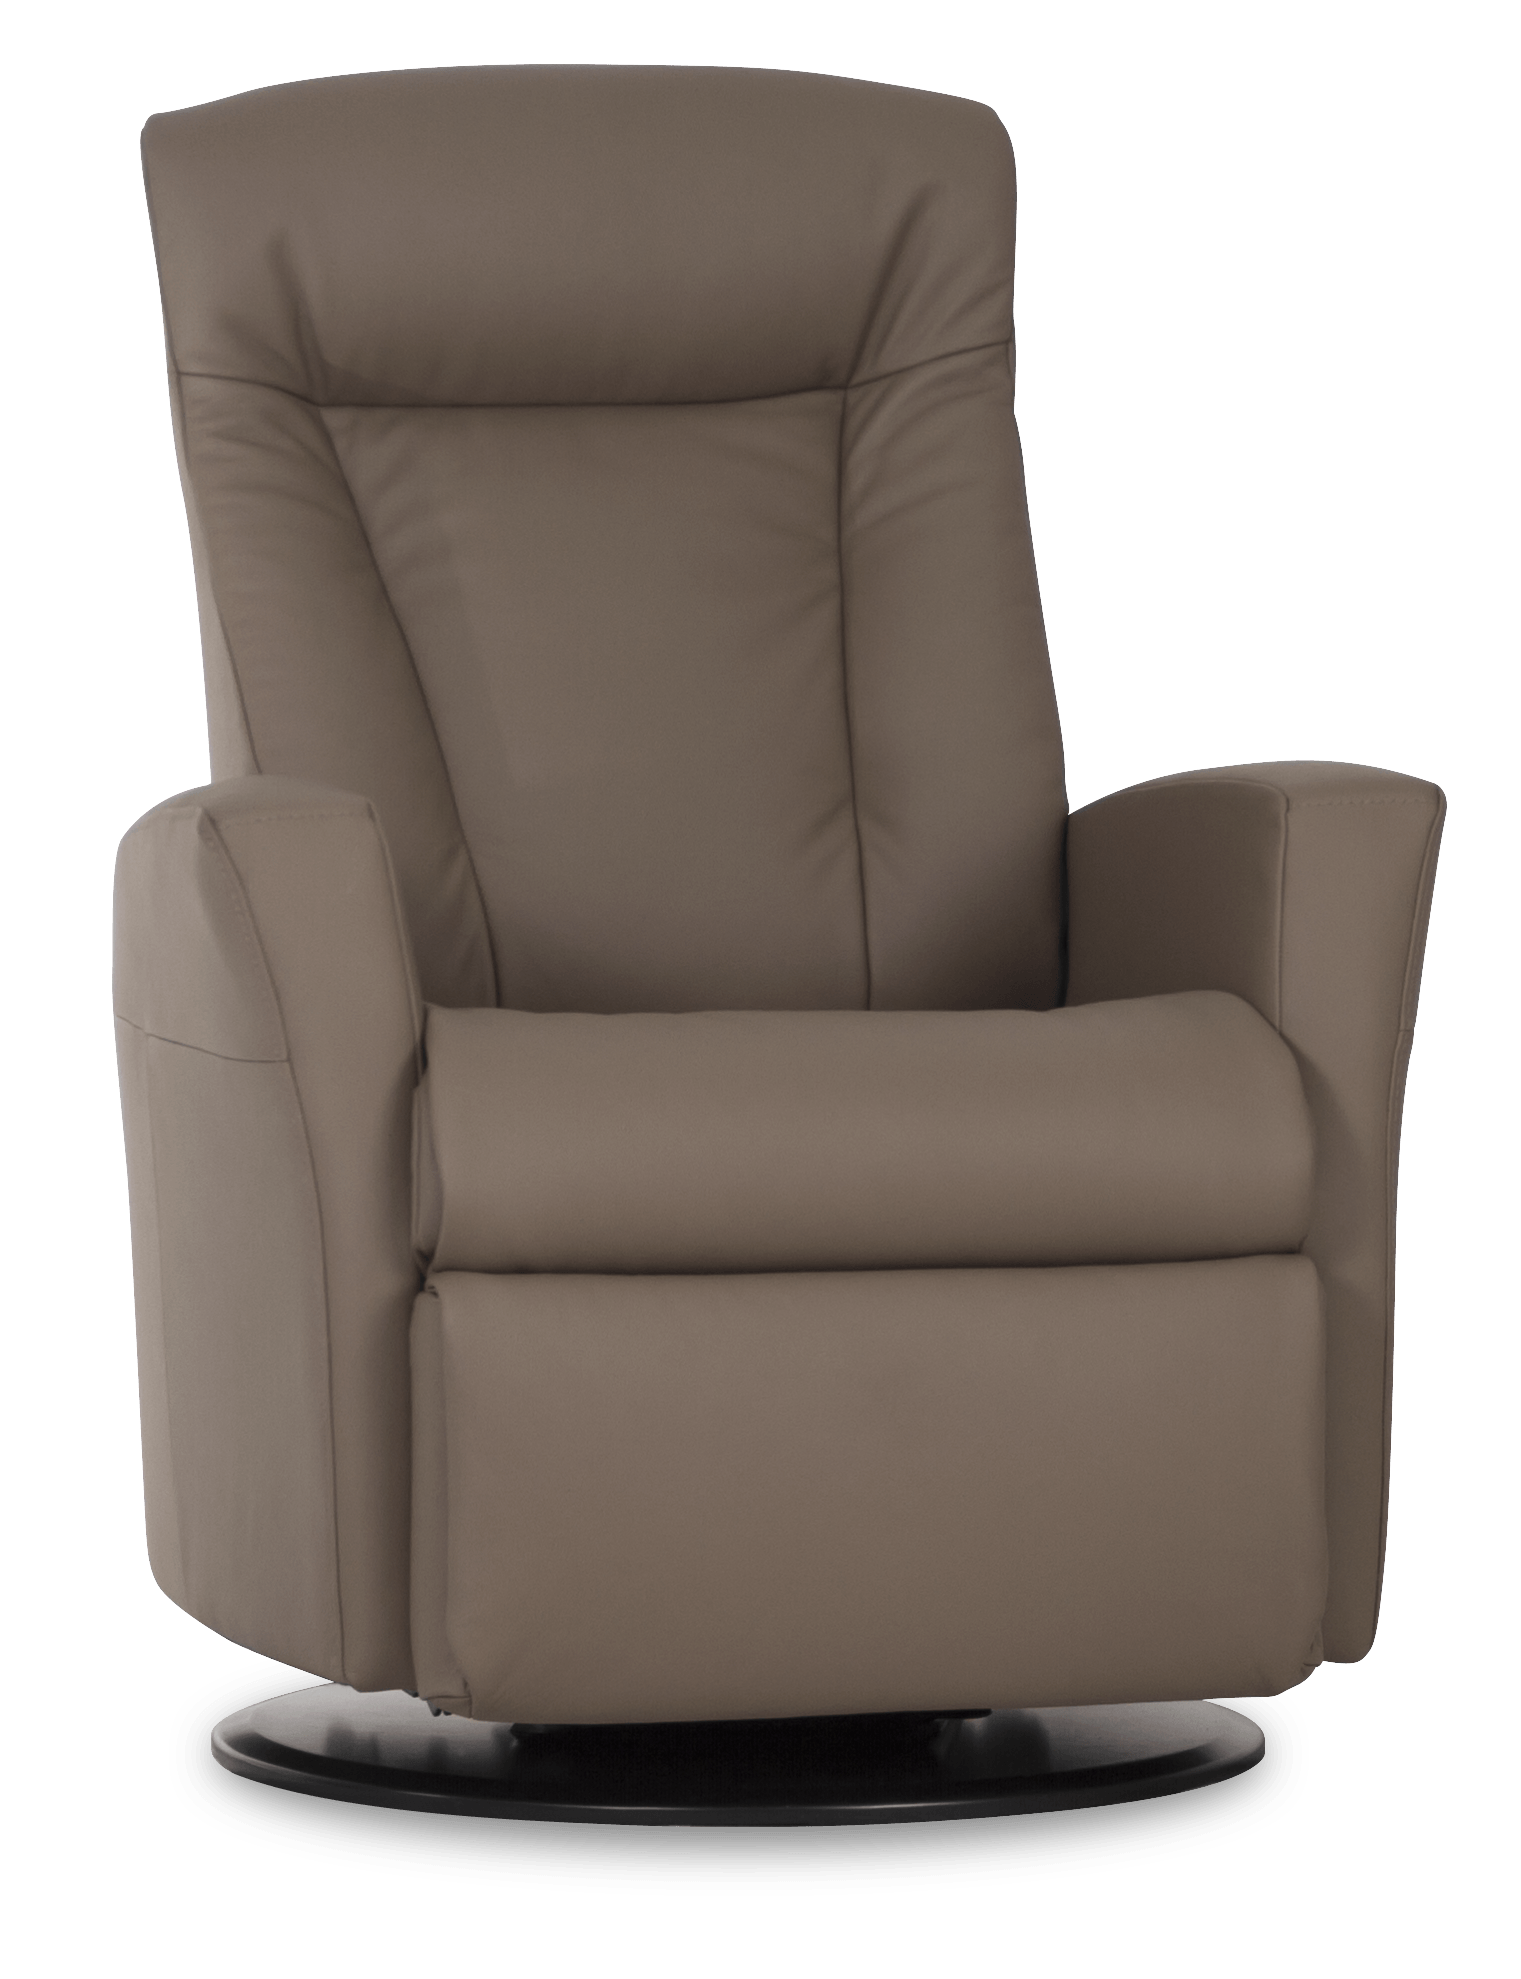 IMG Prince Norwegian Quality Relaxer Recliner from Viking Trader